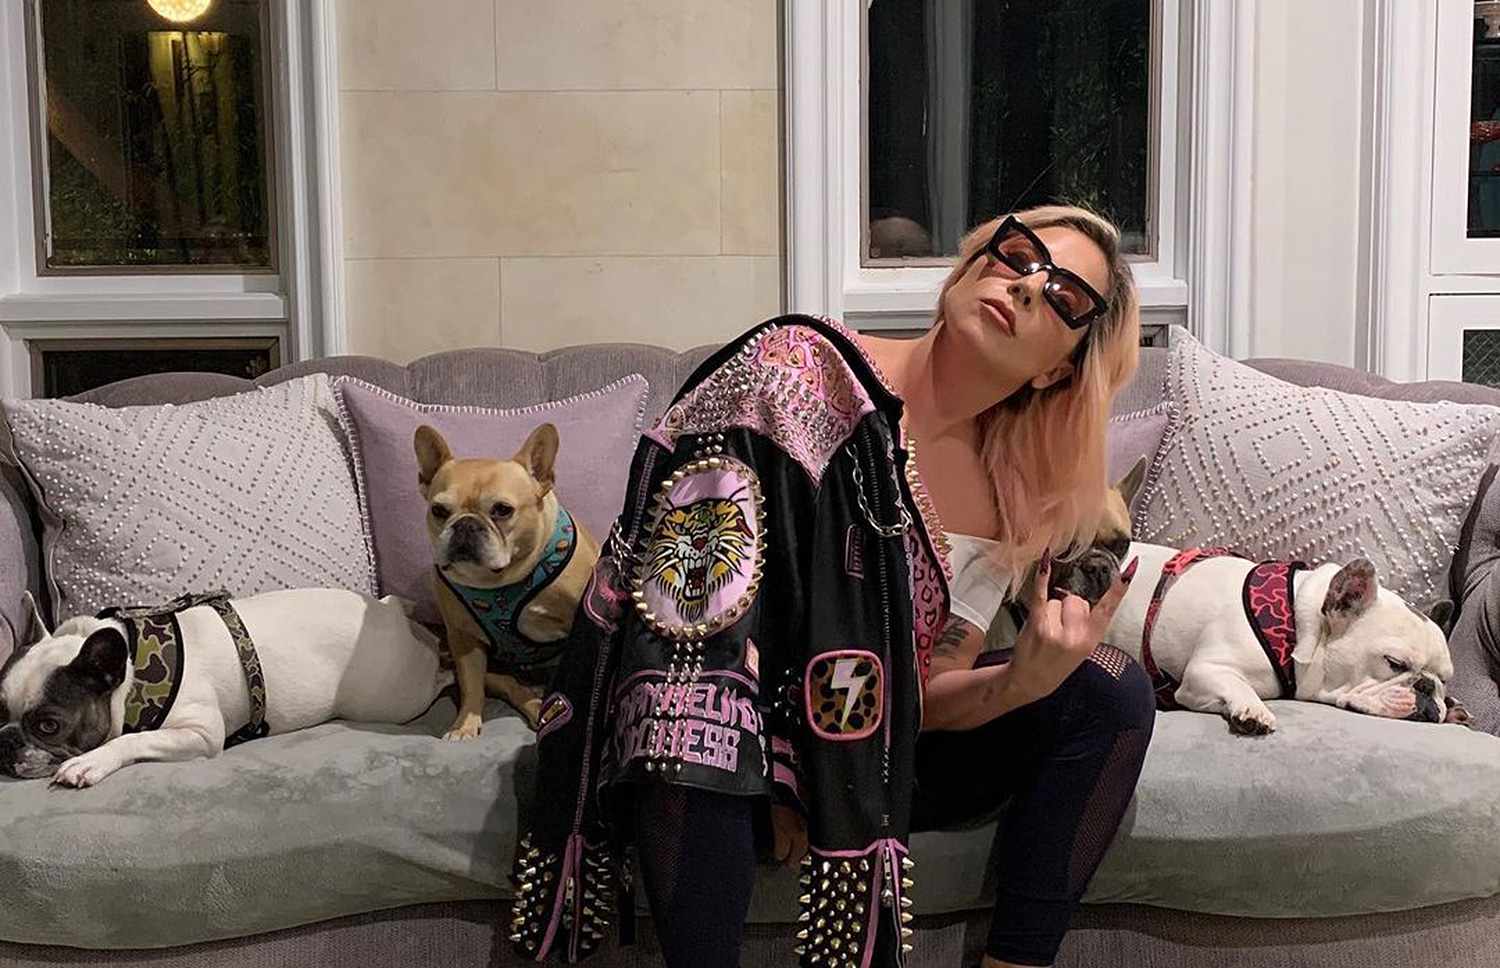 Video Appears to Show Lady Gaga's Dog Walker Getting Shot | PEOPLE.com